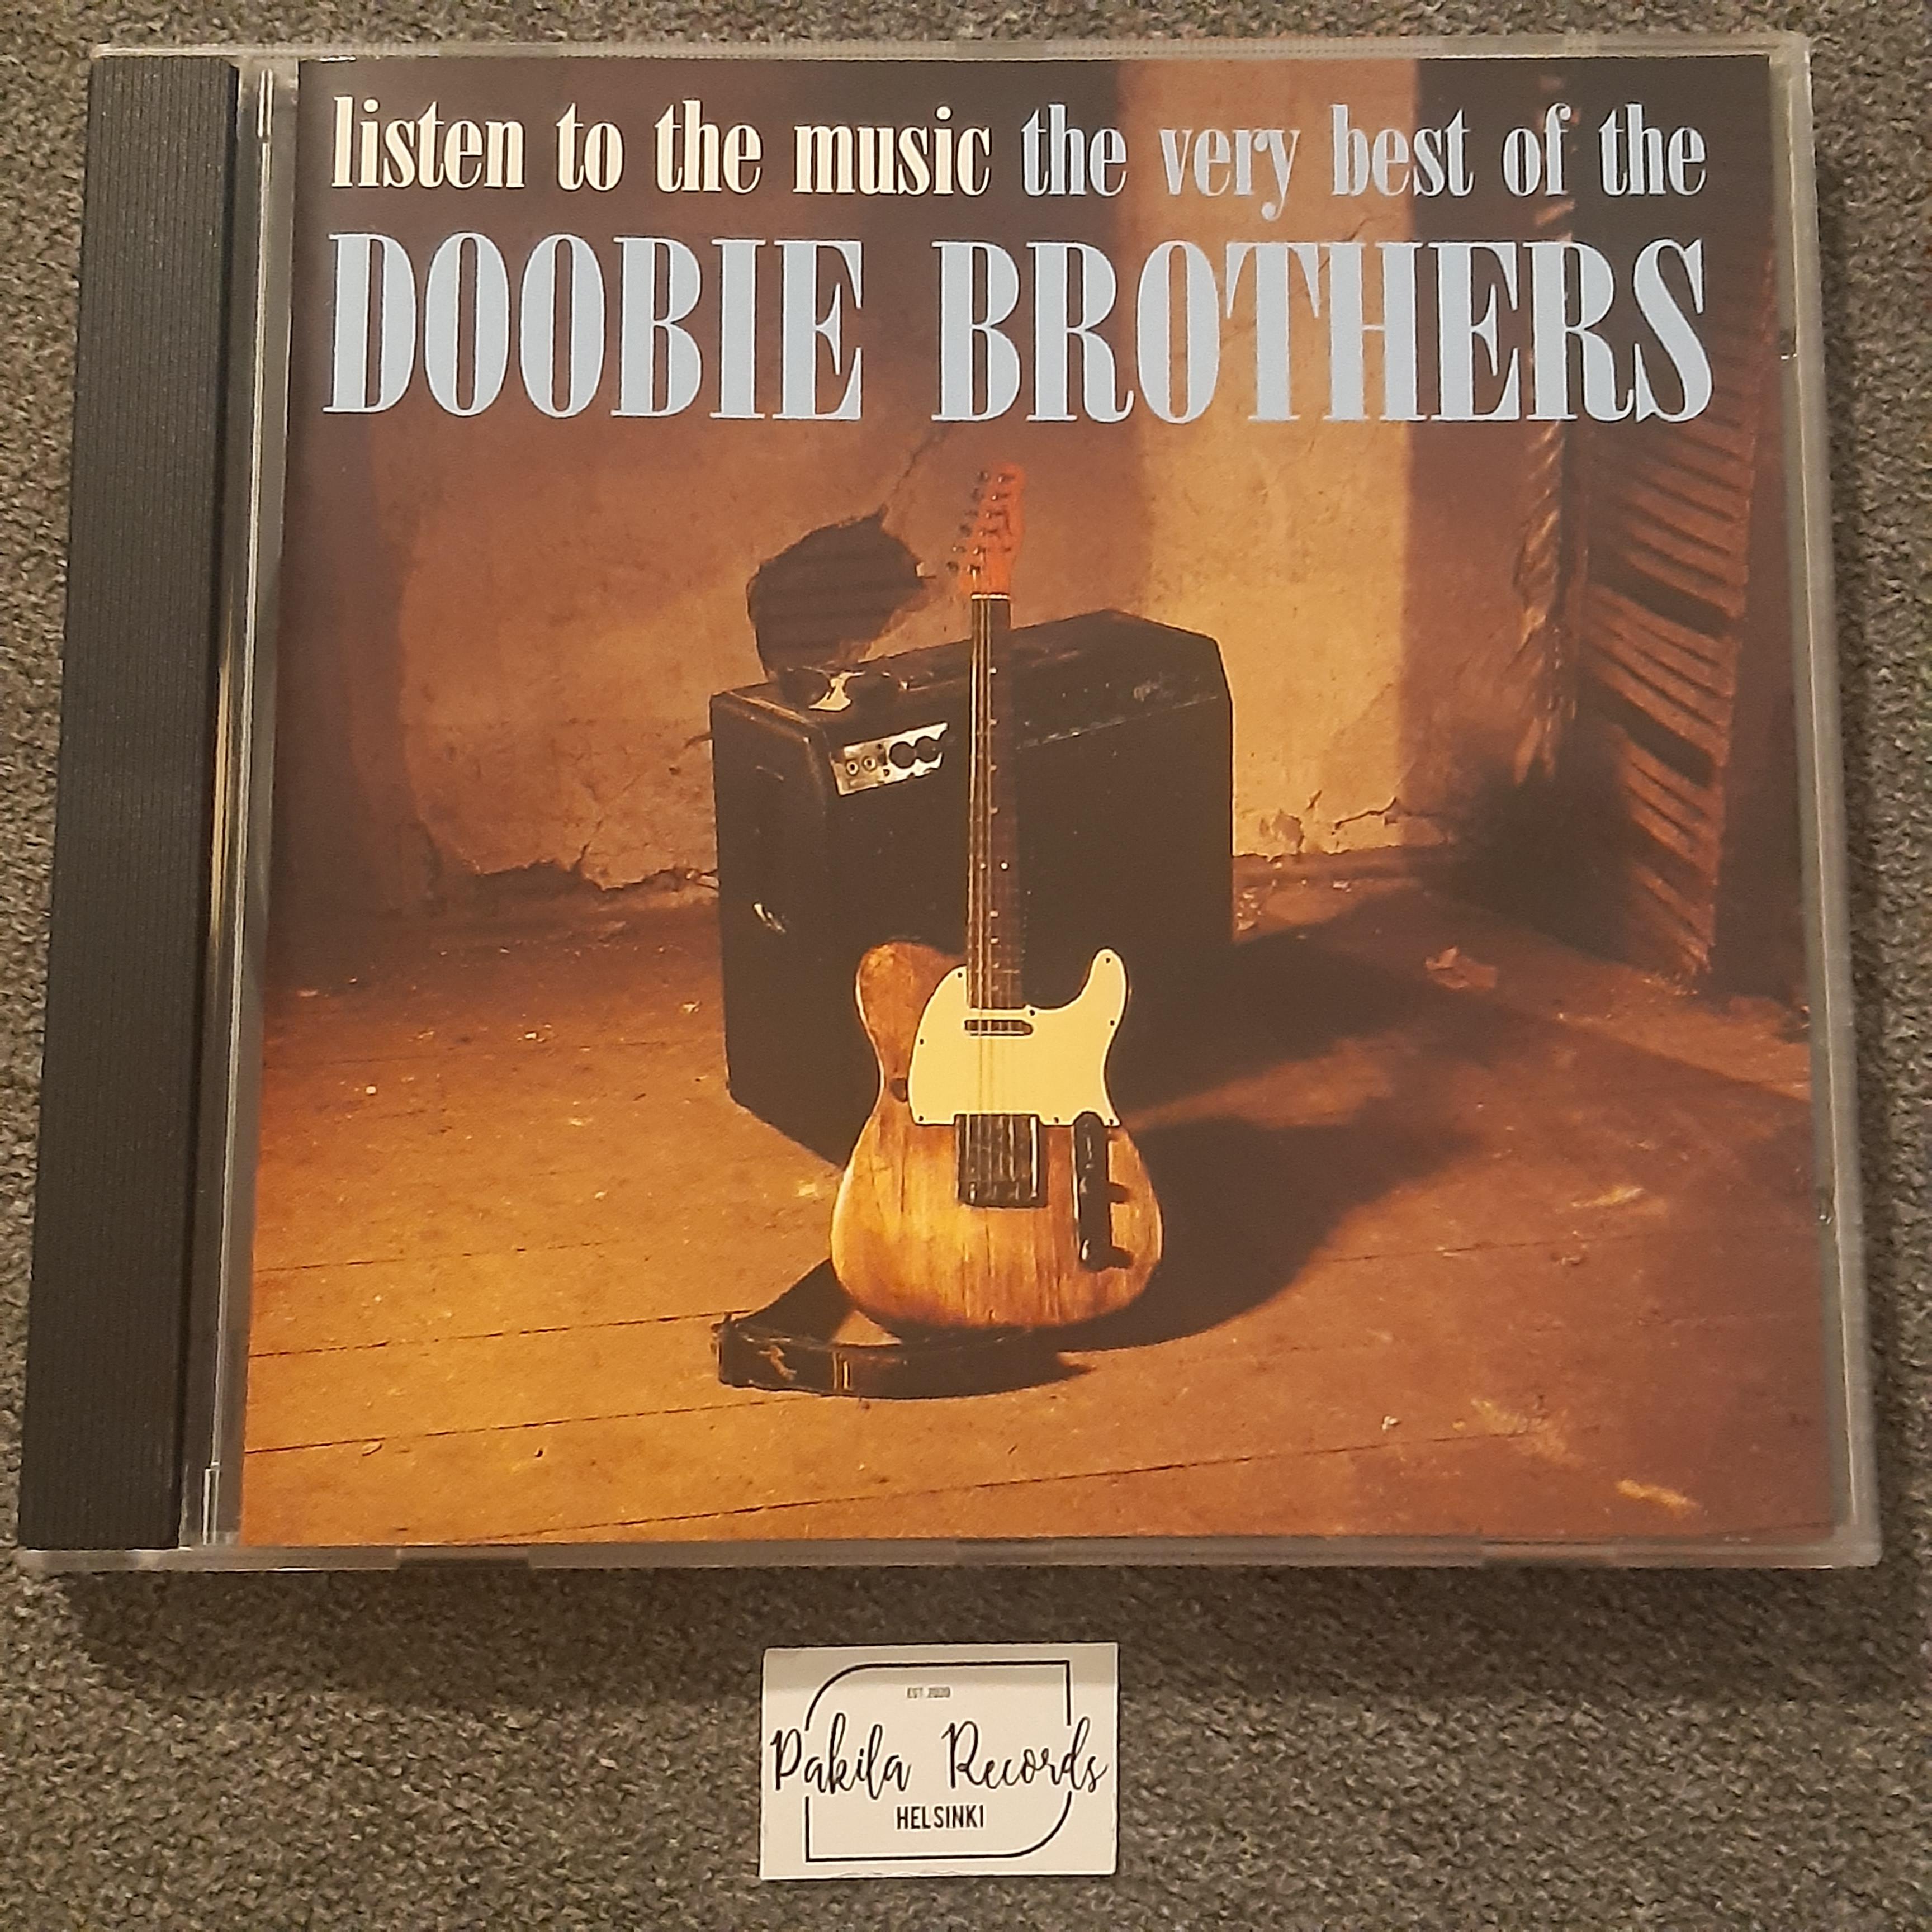 Doobie Brothers - Listen To The Music, The Very Best Of The Doobie Brothers - CD (käytetty)